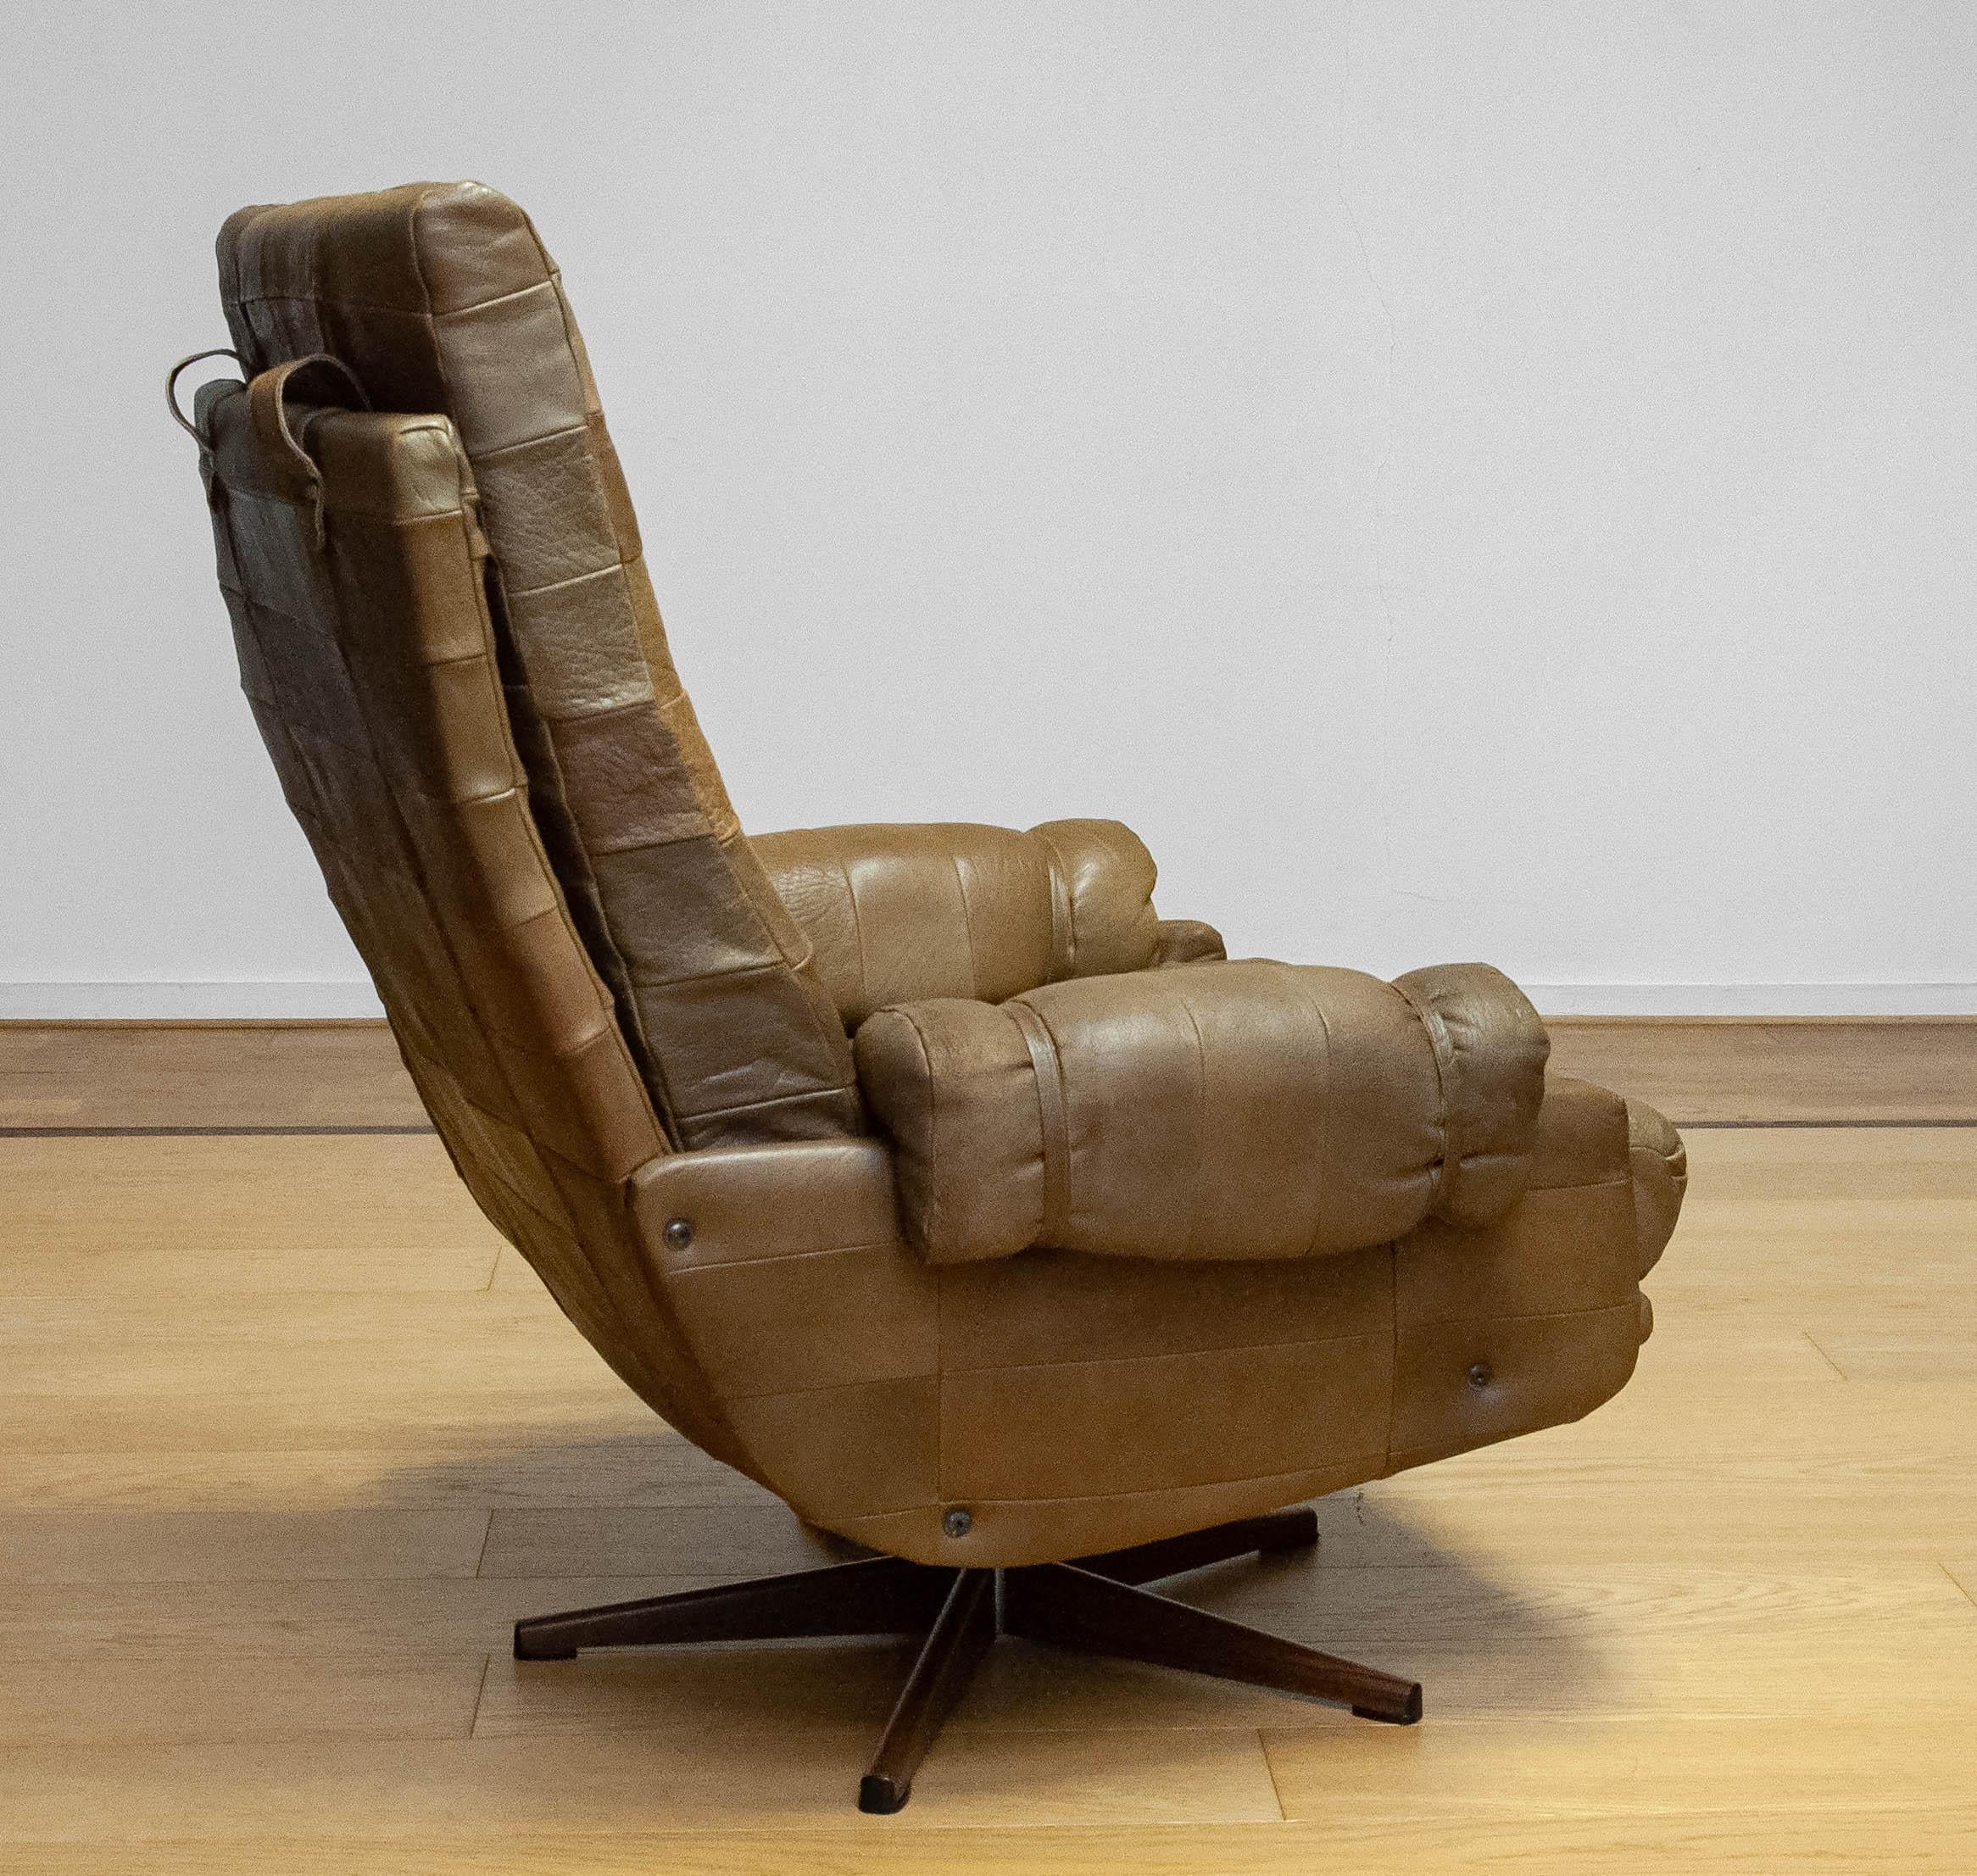 Late 20th Century 70s Swivel Chair By Arne Norell Möbel AB In Sturdy Olive Green Patchwork Leather For Sale